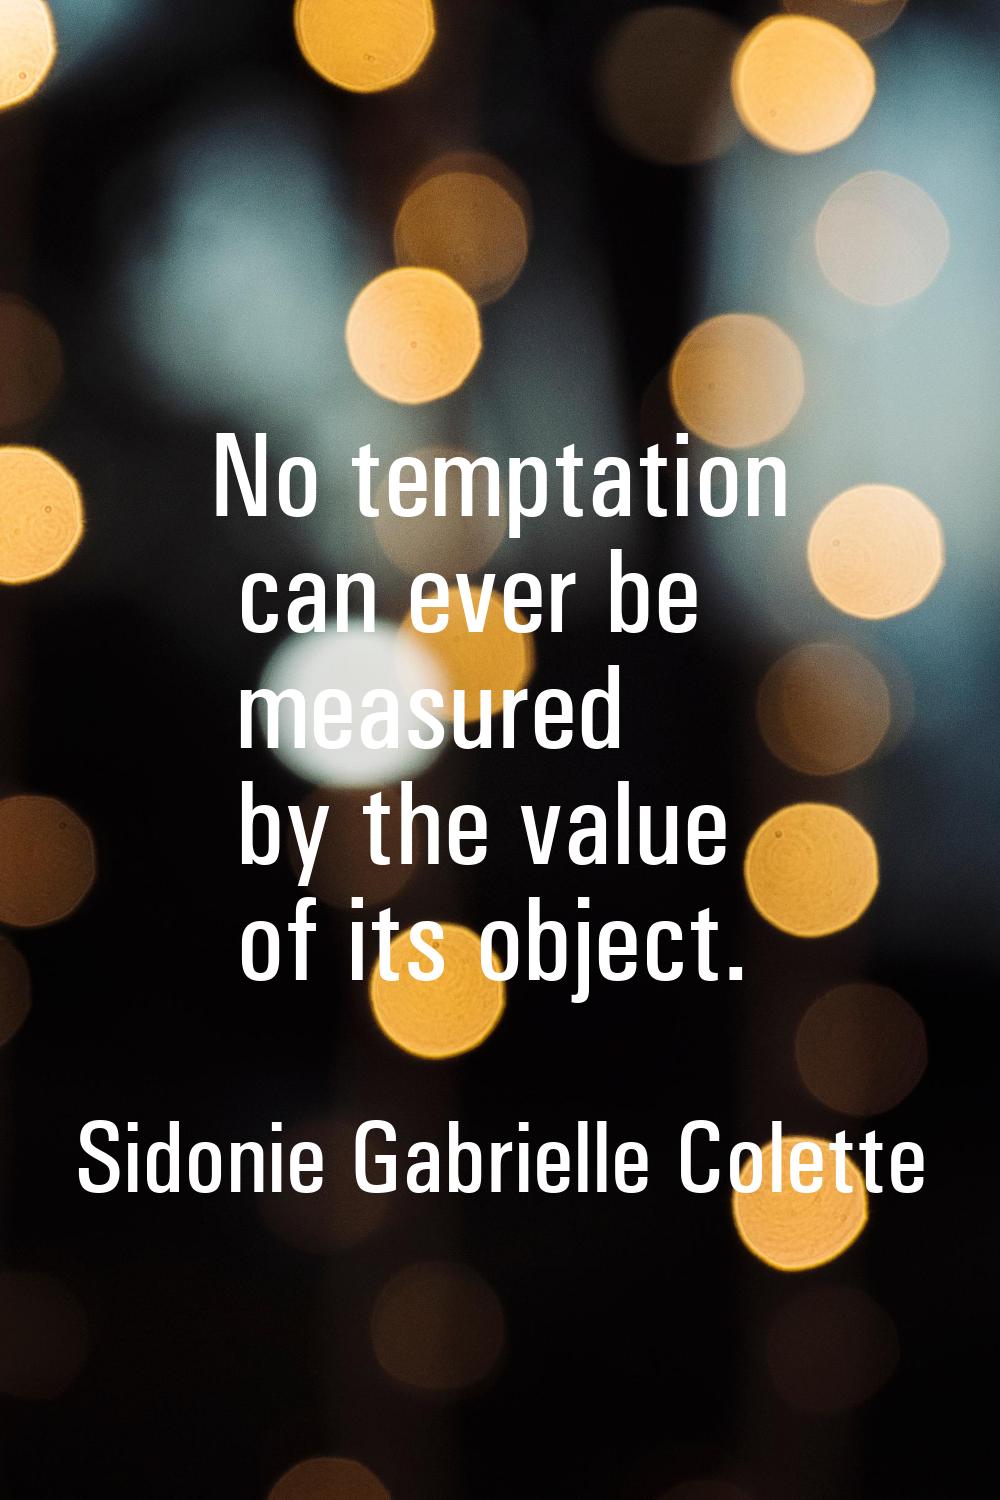 No temptation can ever be measured by the value of its object.